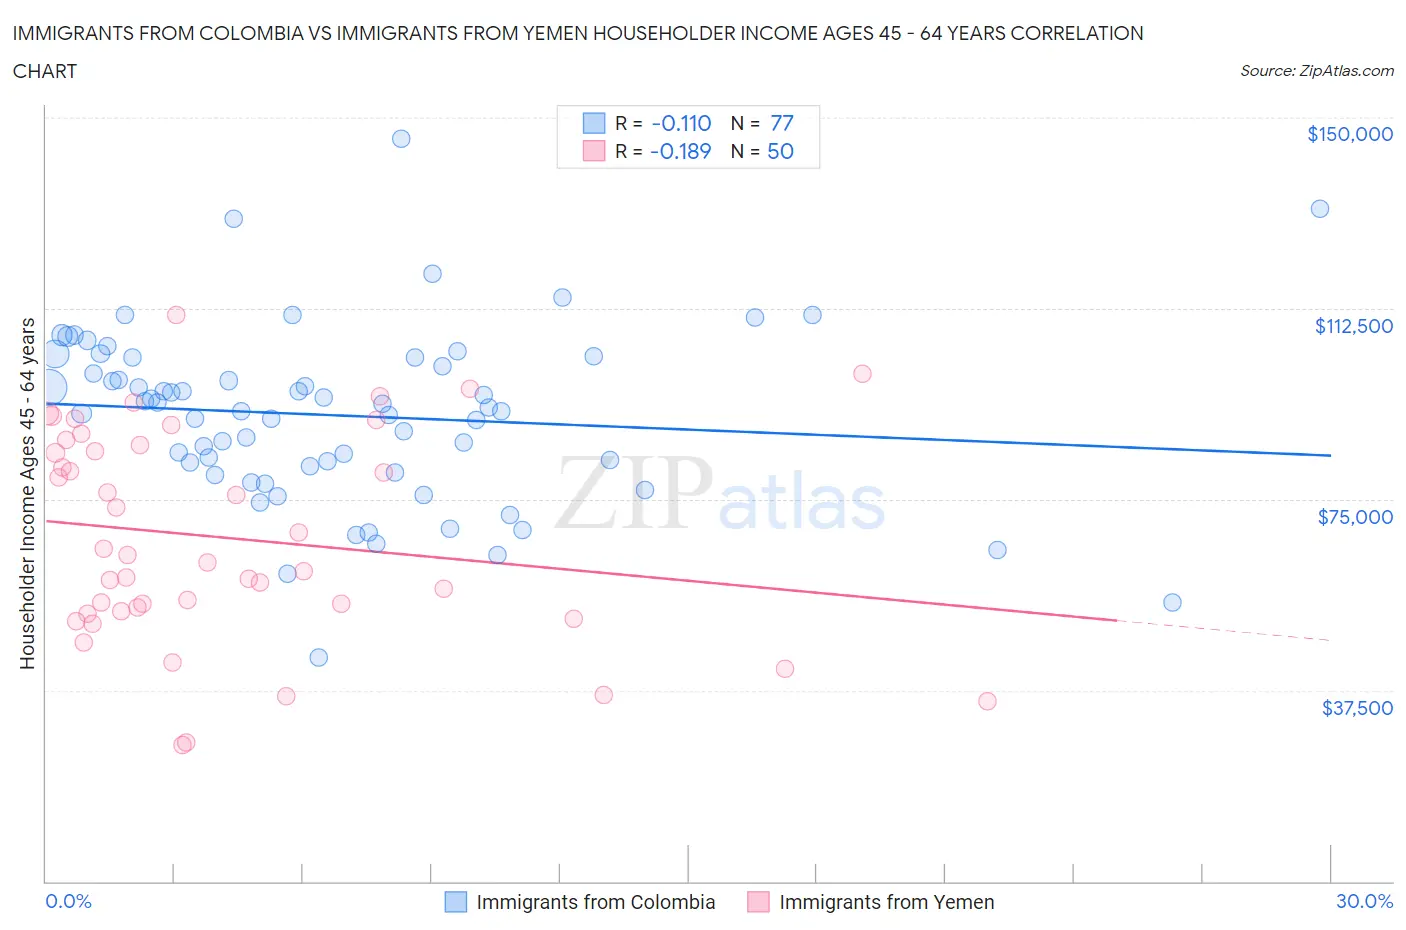 Immigrants from Colombia vs Immigrants from Yemen Householder Income Ages 45 - 64 years